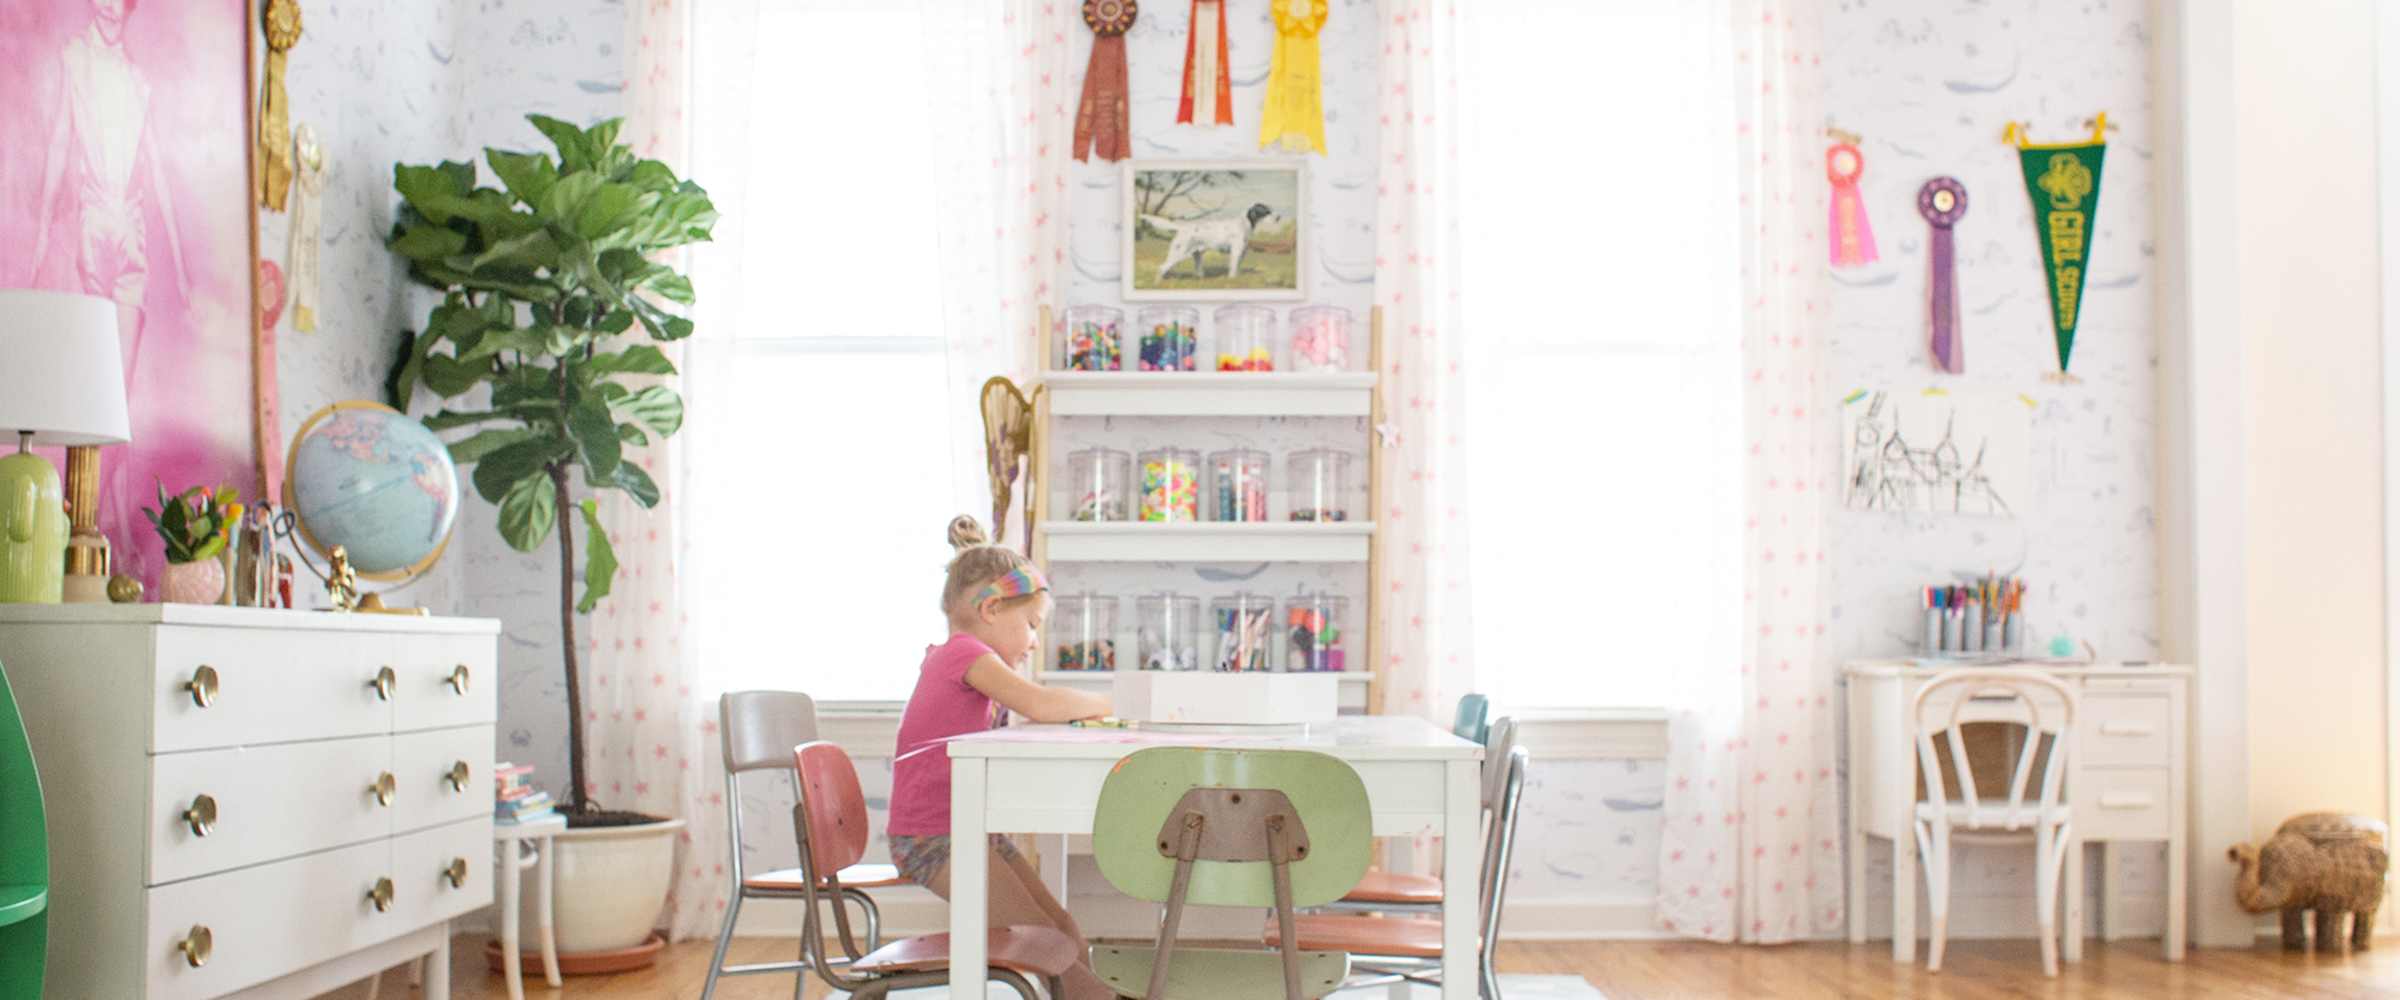 Craft Room Ideas for Kids